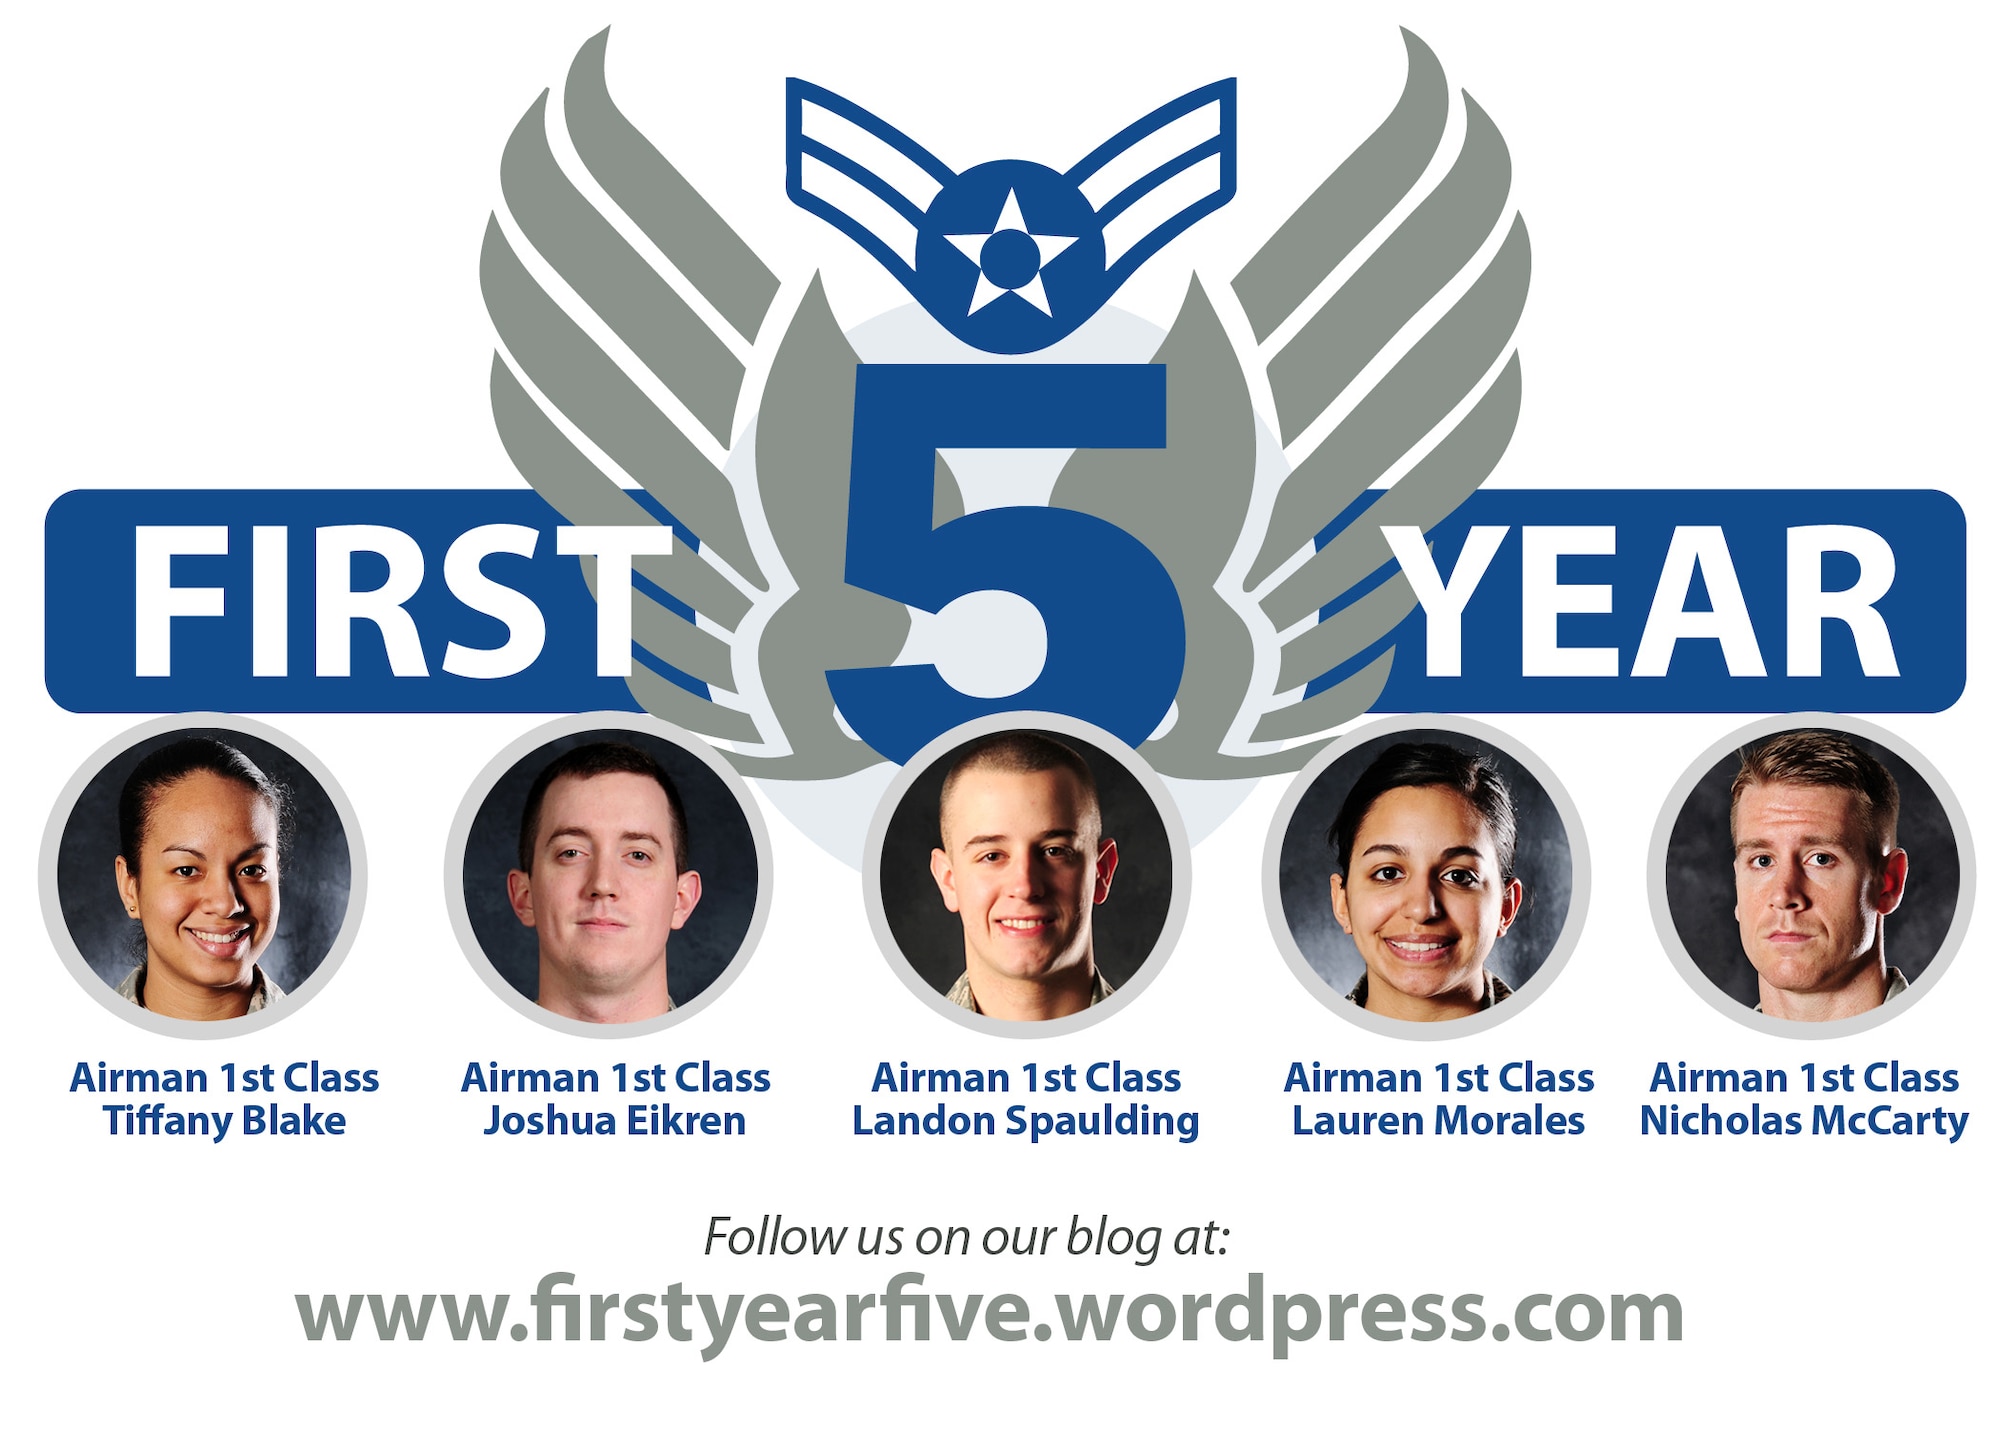 Follow five of Scott Air Force Base's newest Airman as tehy adapt to their first year in the military at www.firstyearfive.wordpress.com